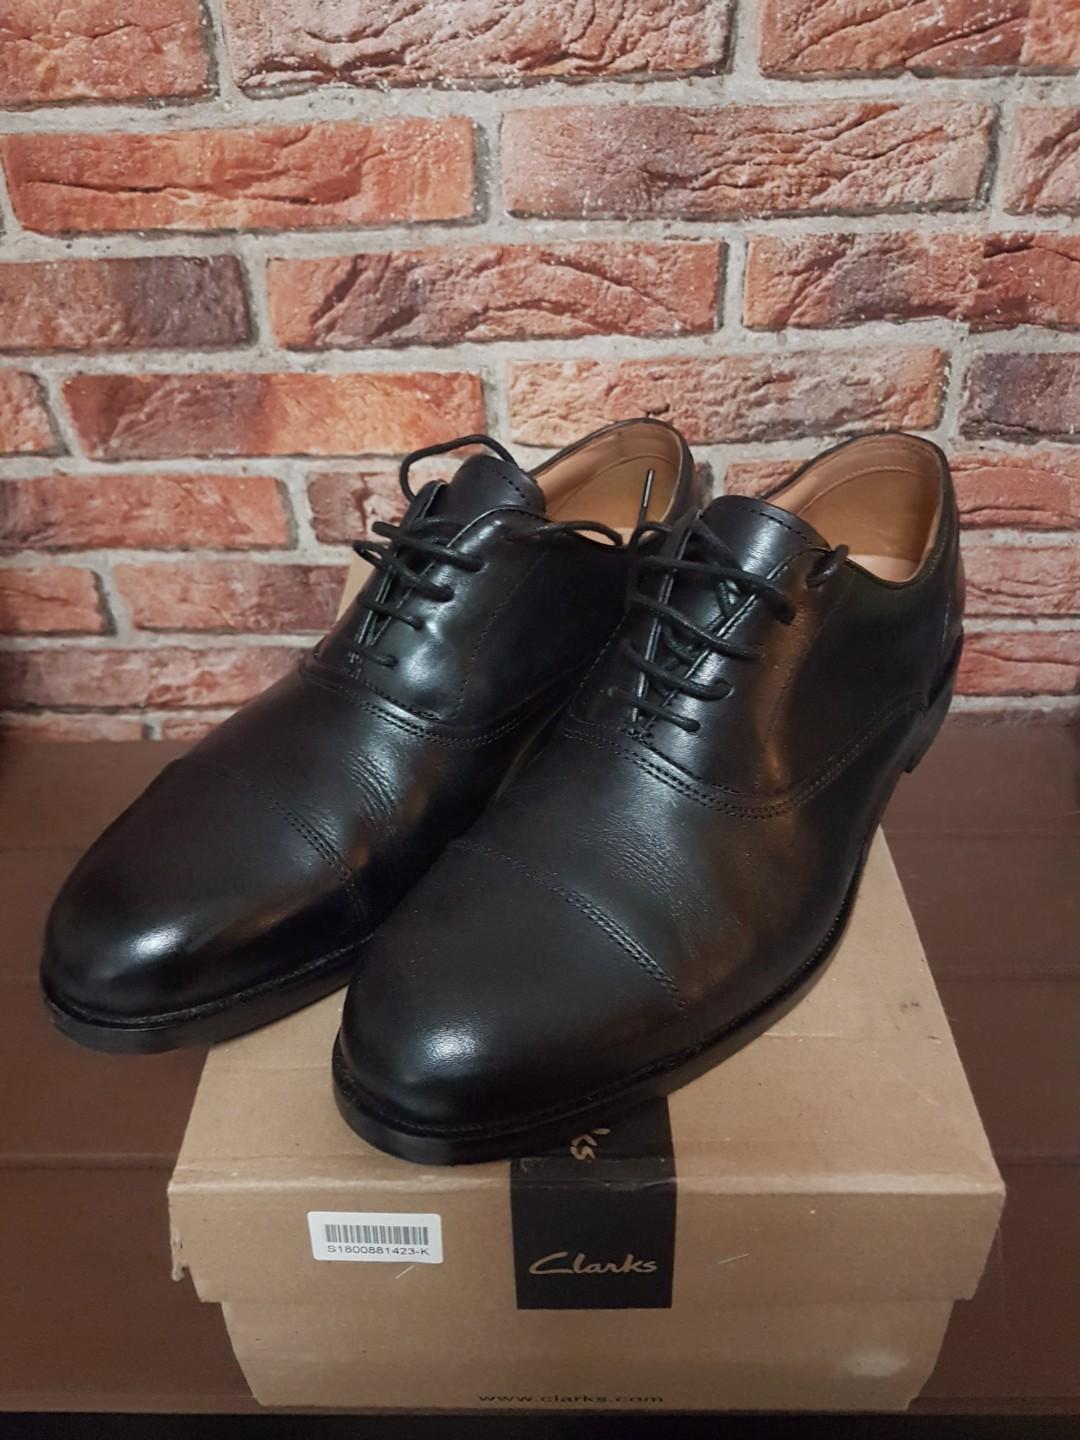 Clarks Coling Boss Work Dress Black Leather Shoes, Men's Fashion ...